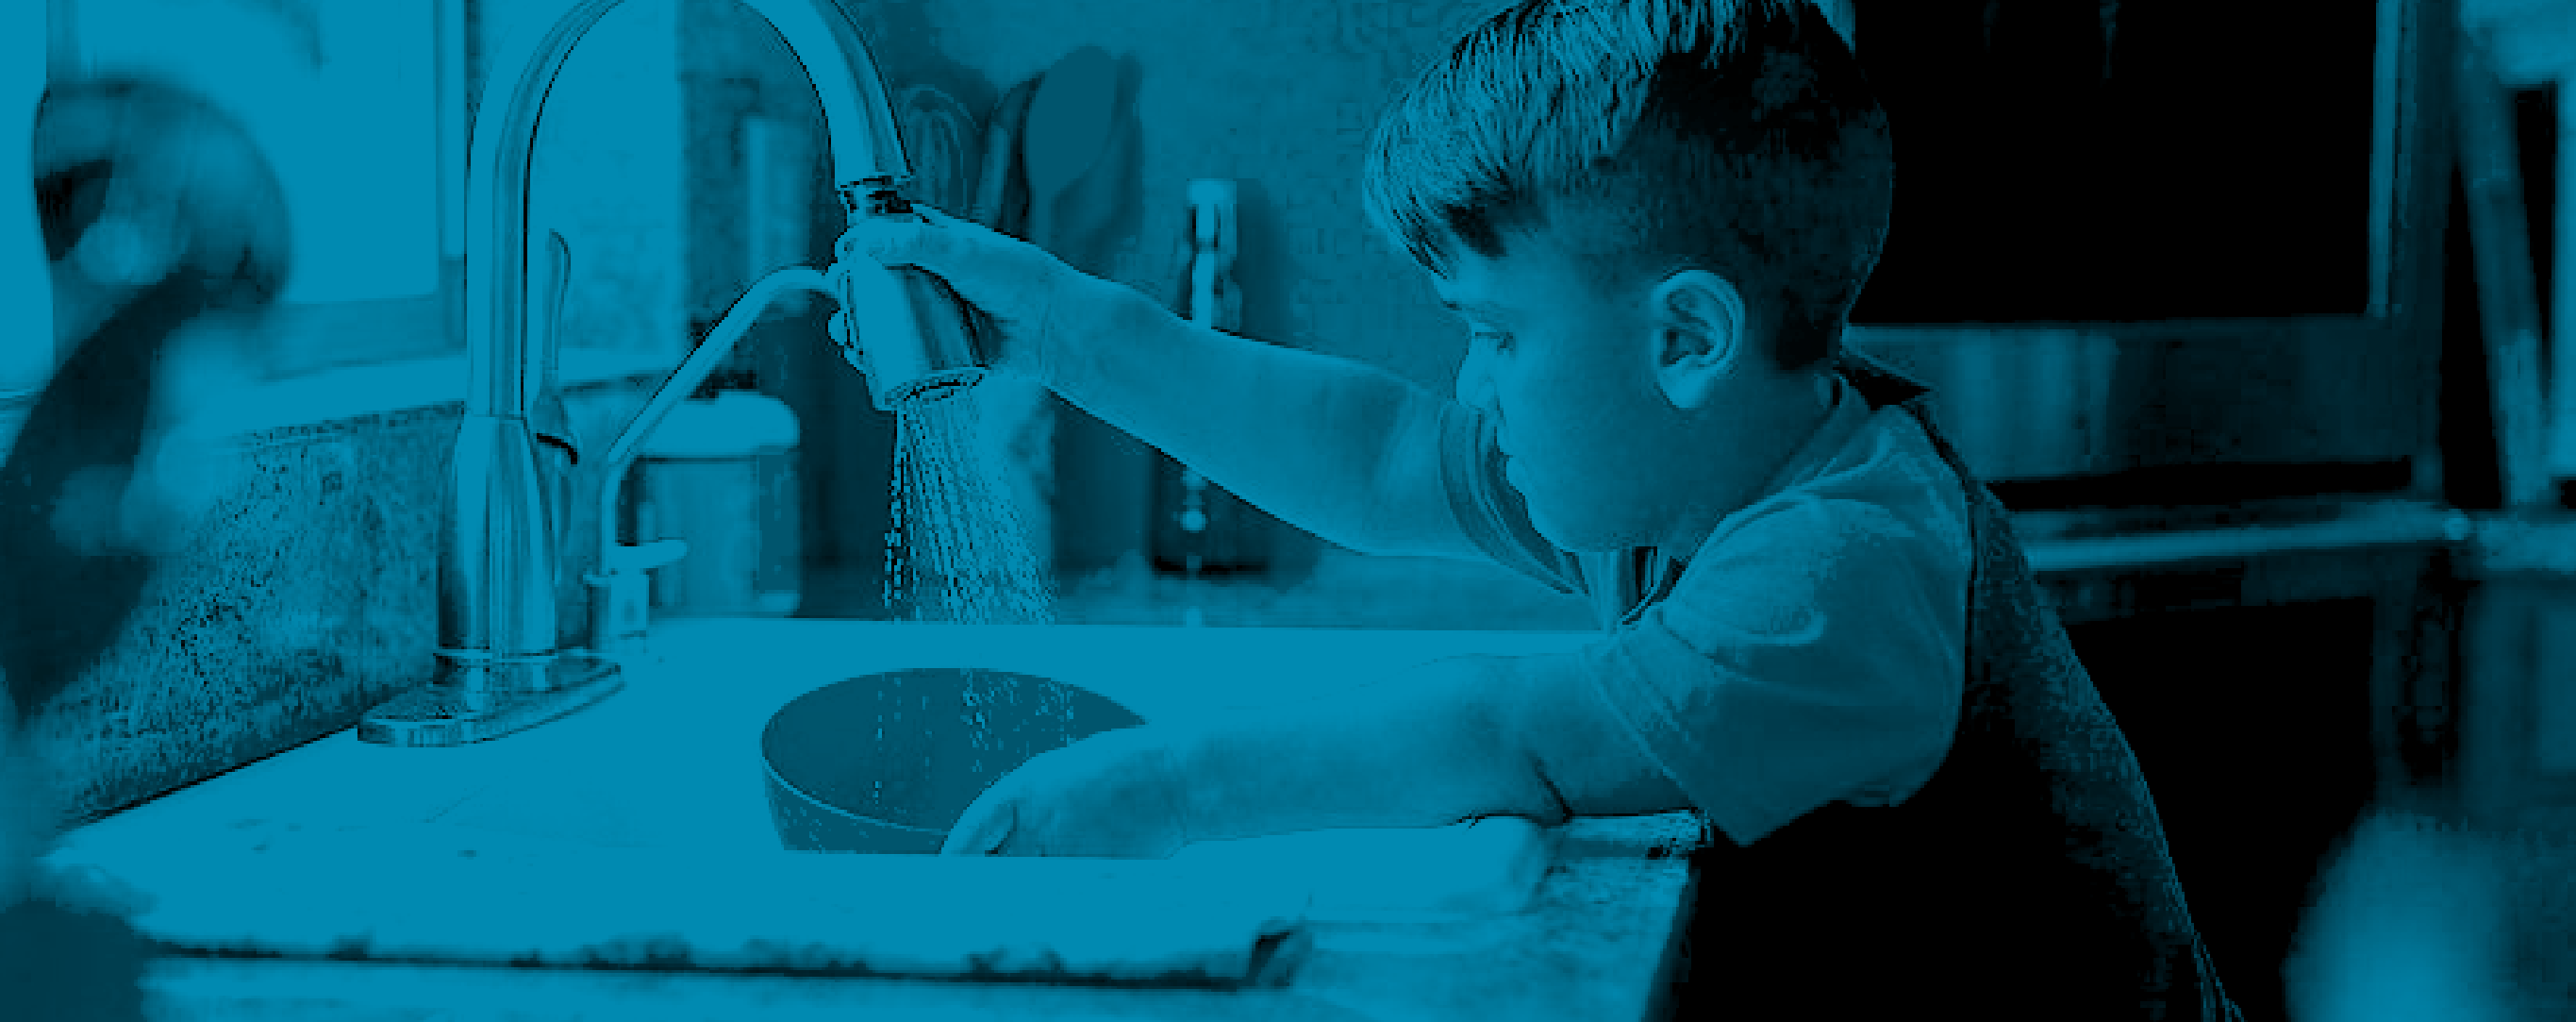 a boy with Achondroplasia washing a bowl in the kitchen sink